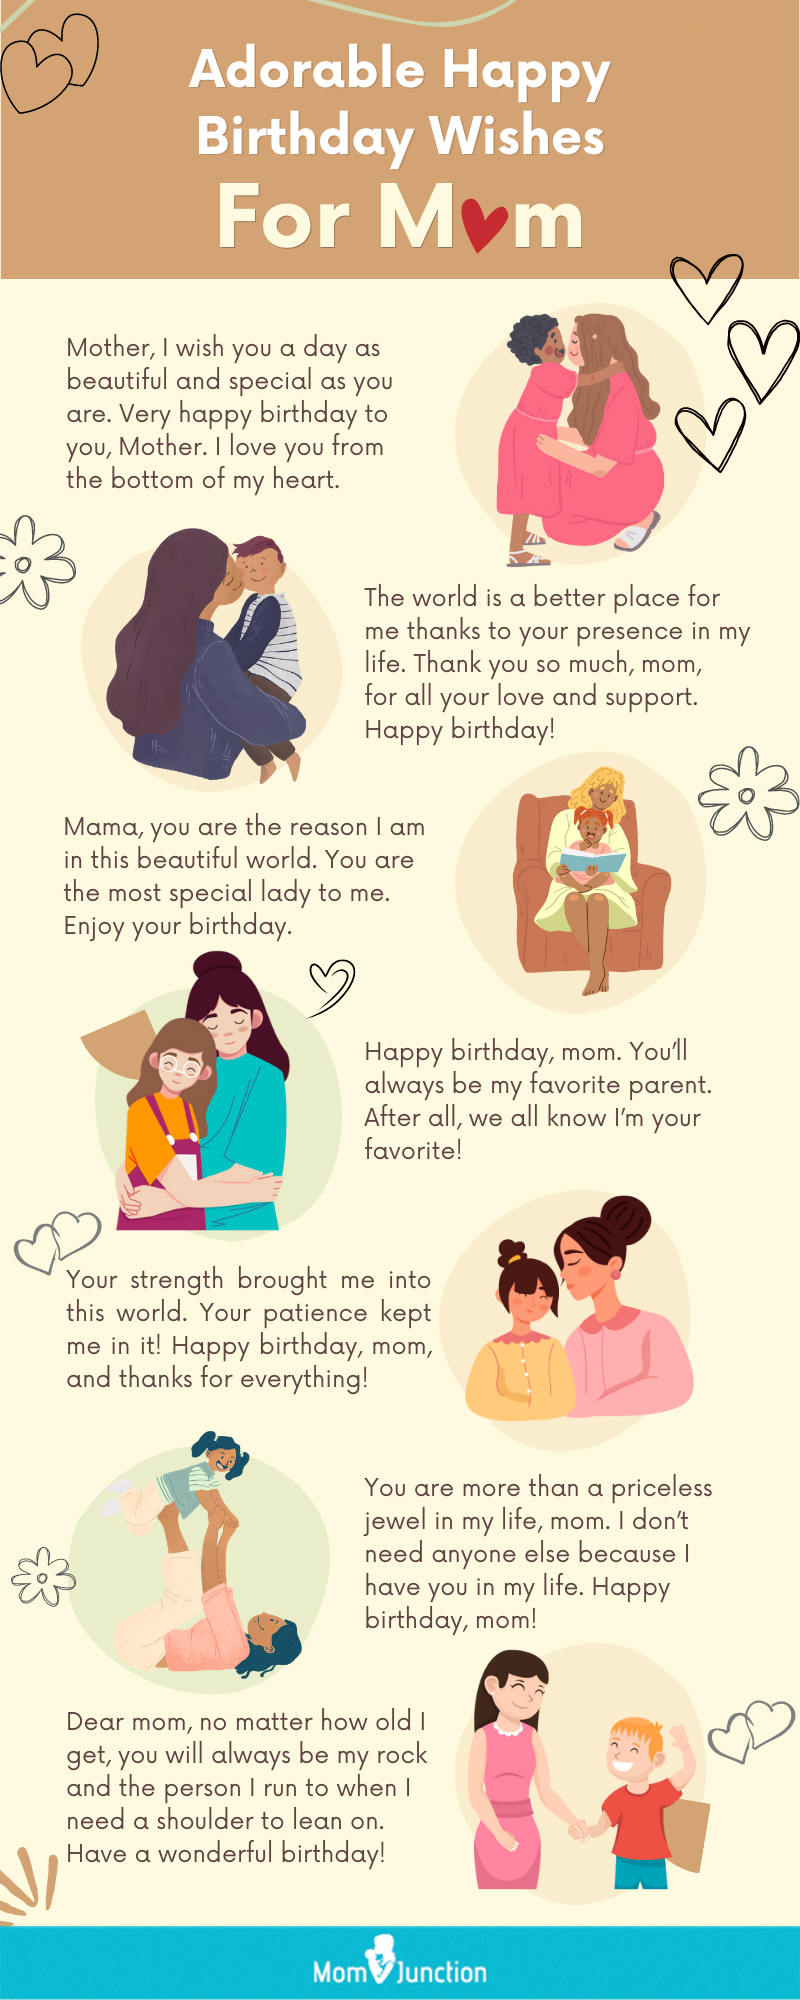 https://www.momjunction.com/wp-content/uploads/2022/11/Adorable-Happy-Birthday-Wishes-For-Mom.png